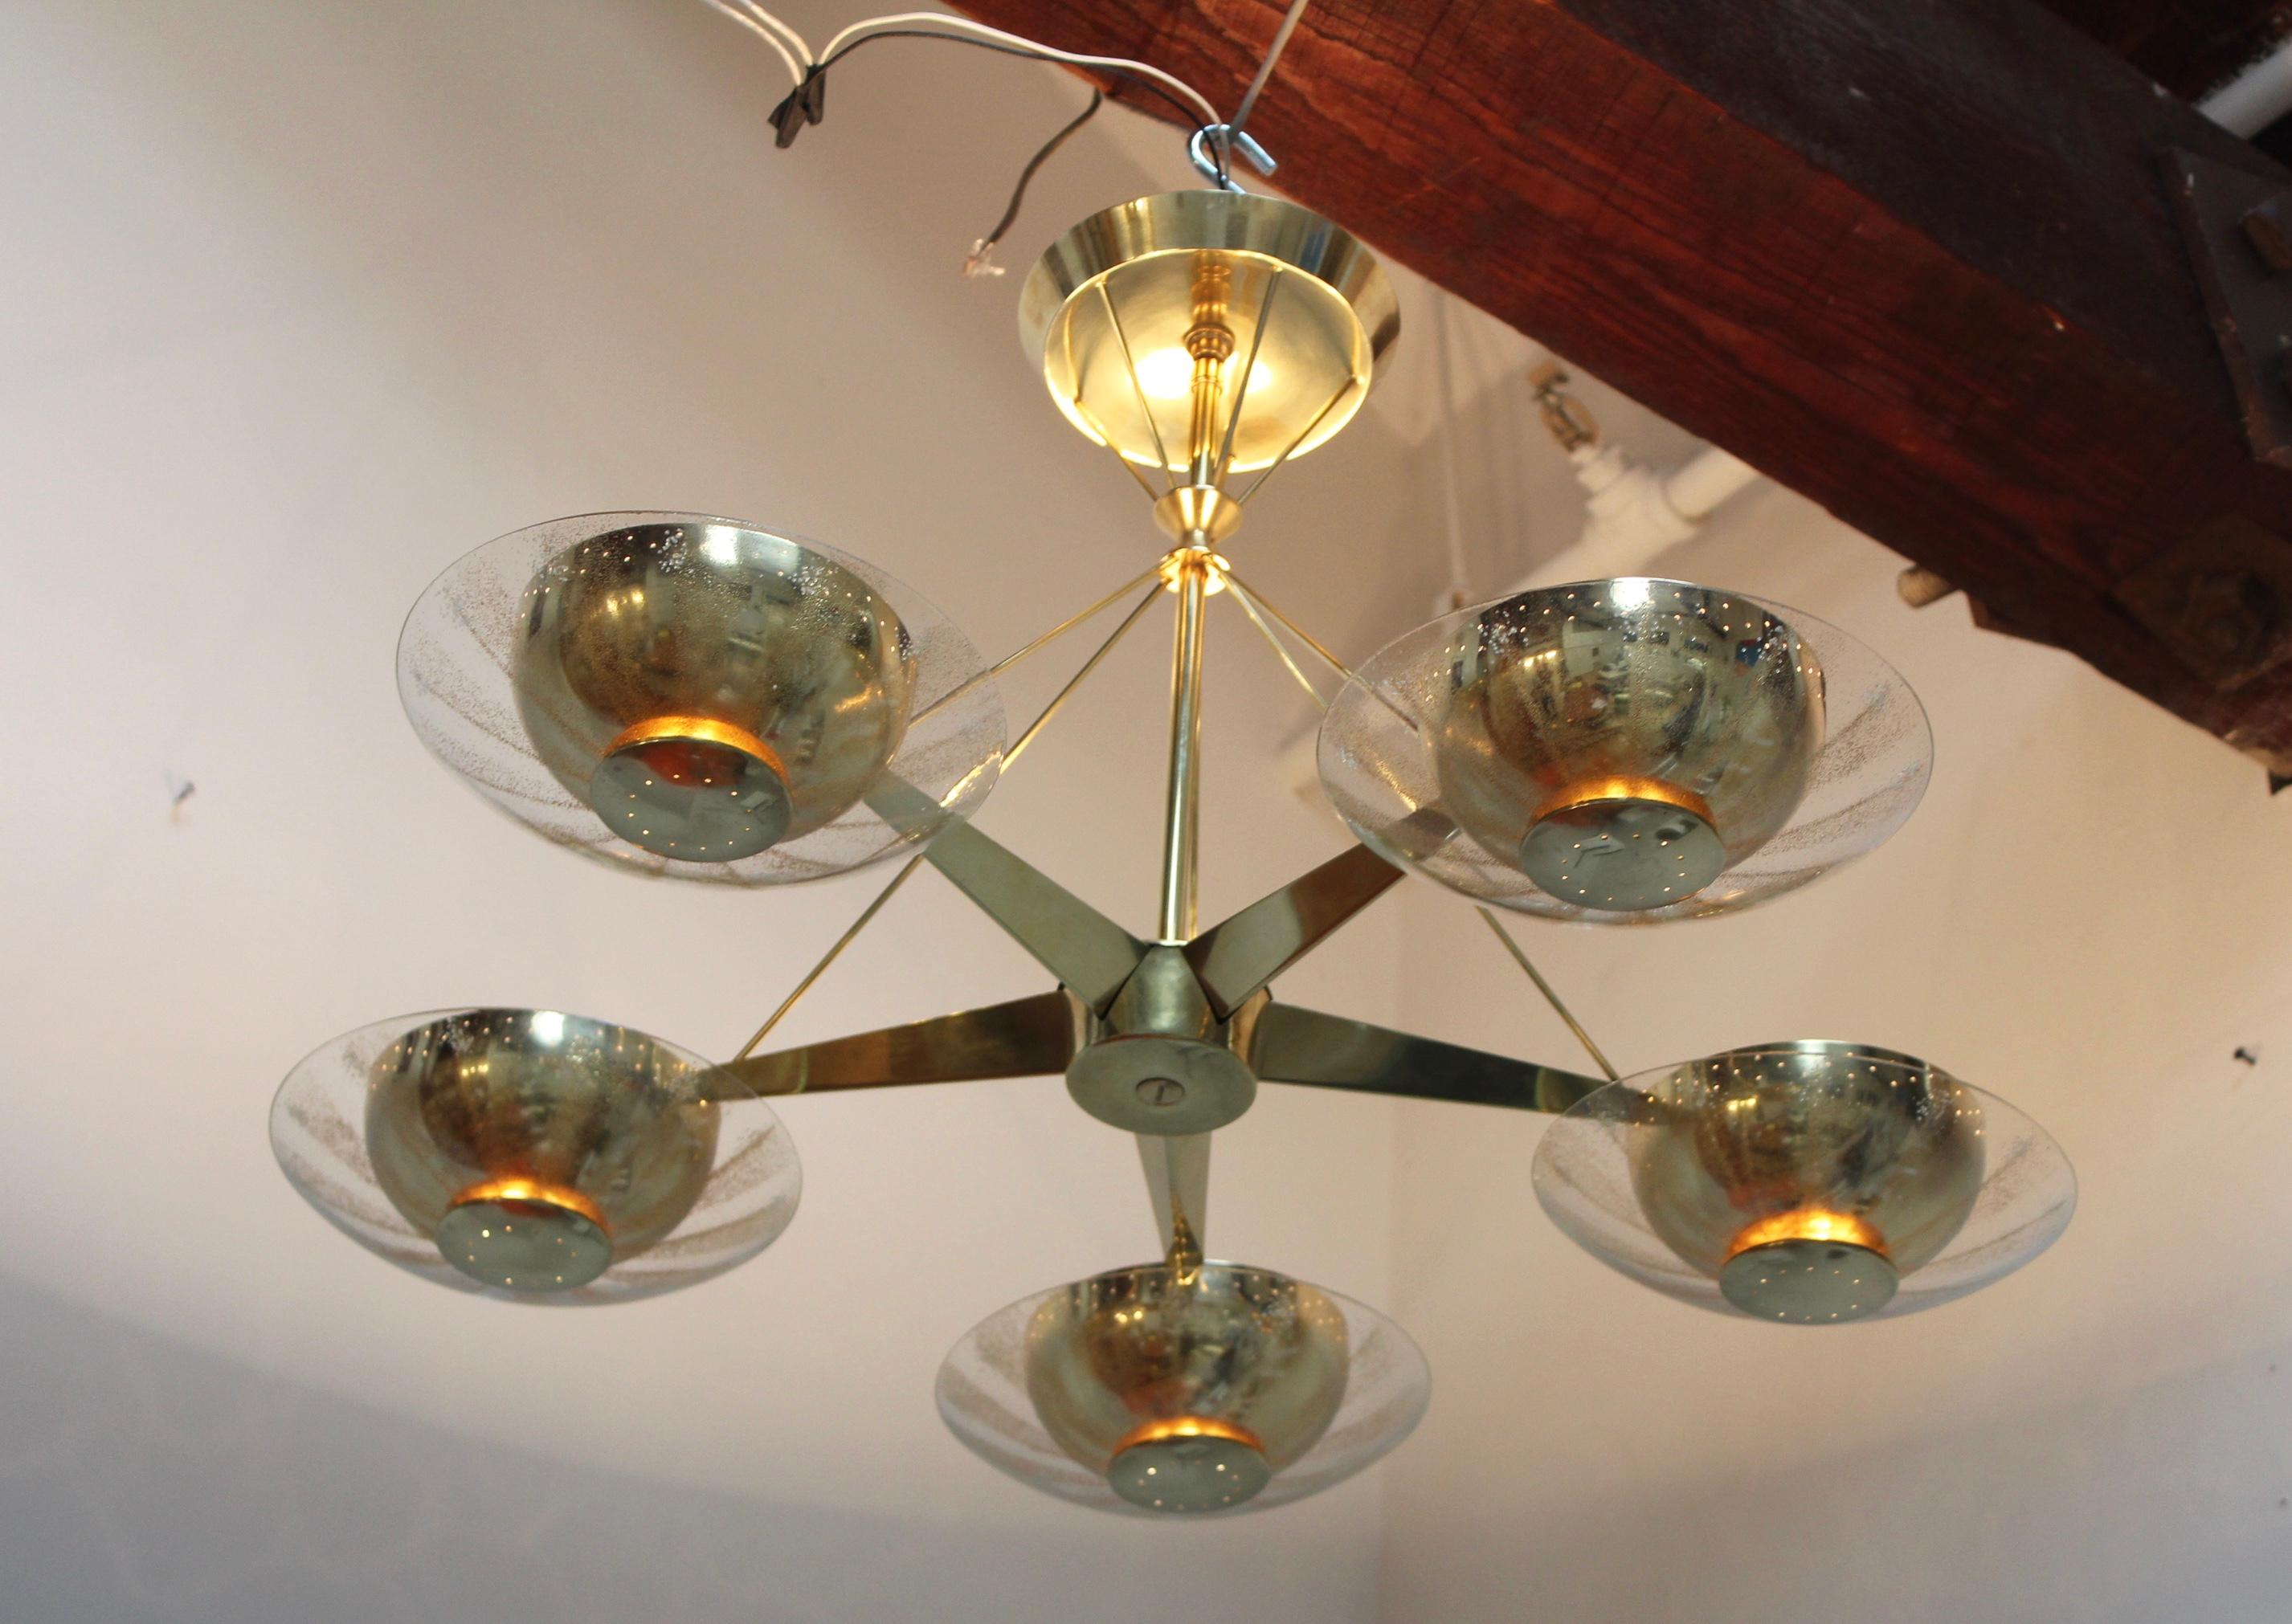 1950s Gerald Thurston for Lightolier brass and glass 5-arm chandelier, the brass have been lightly hand polished. Newly rewired and ready to use.

Two chandeliers are available.